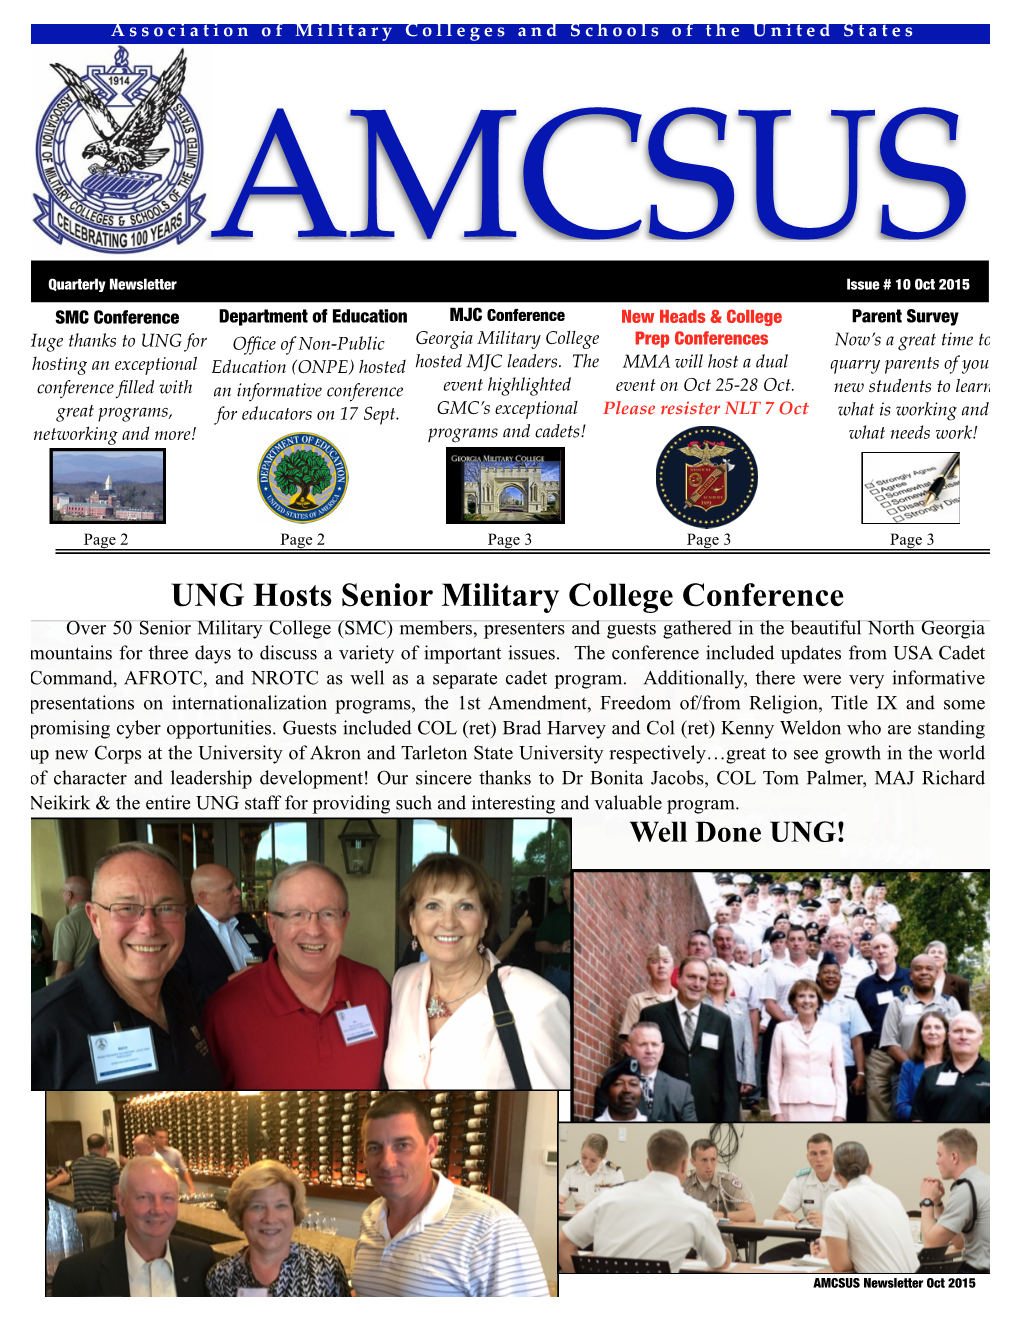 UNG Hosts Senior Military College Conference